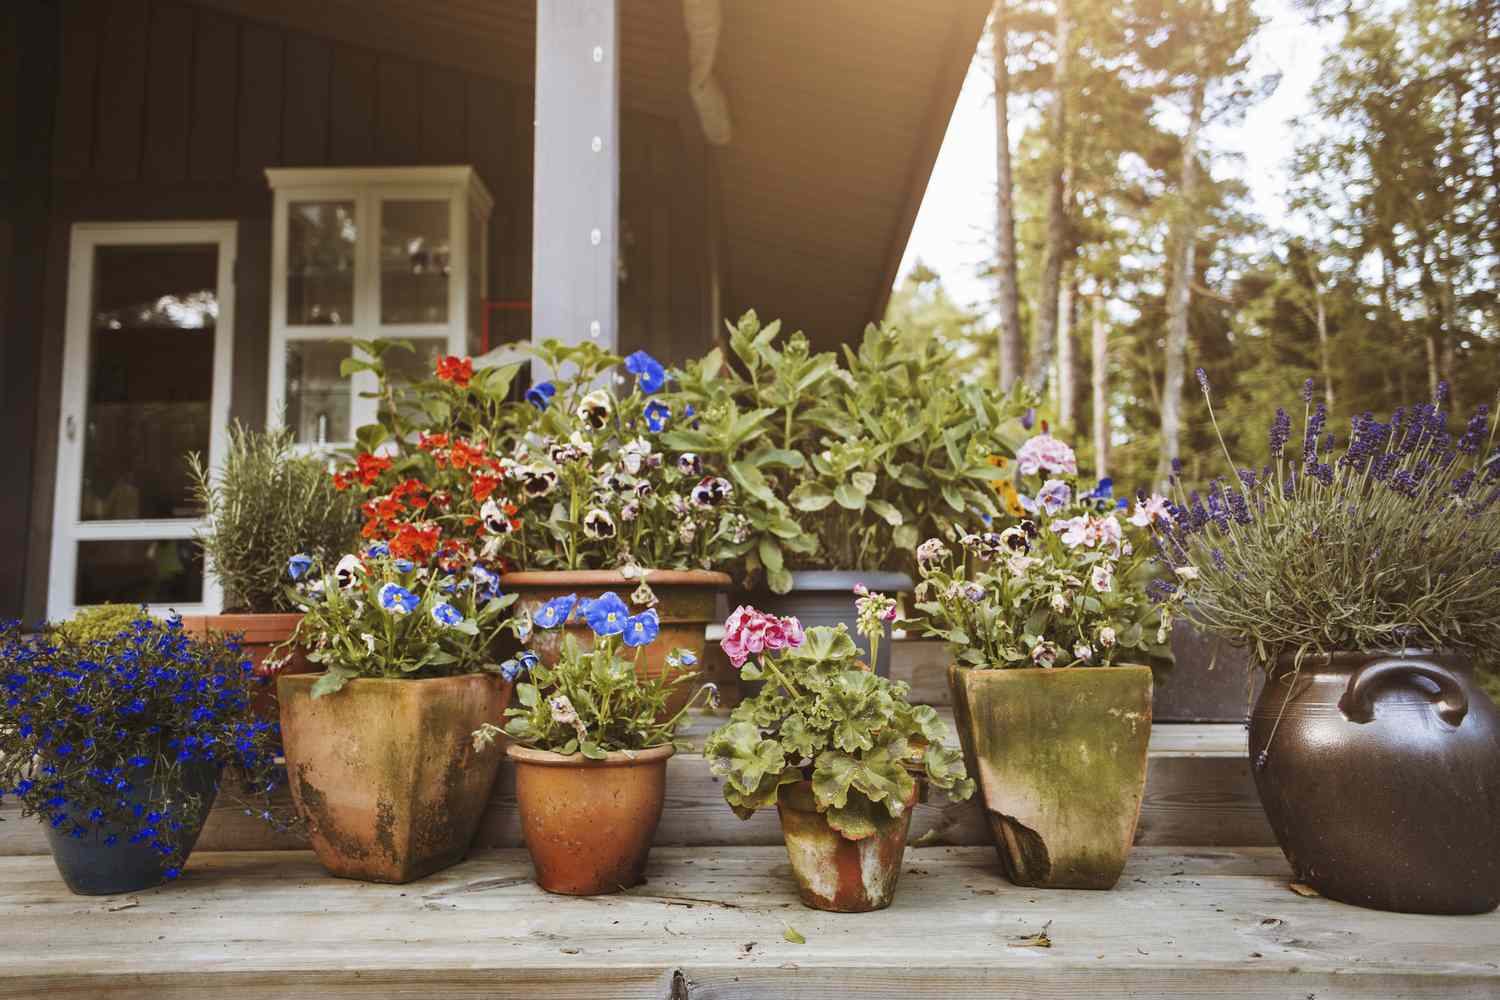 A stoop with container gardens